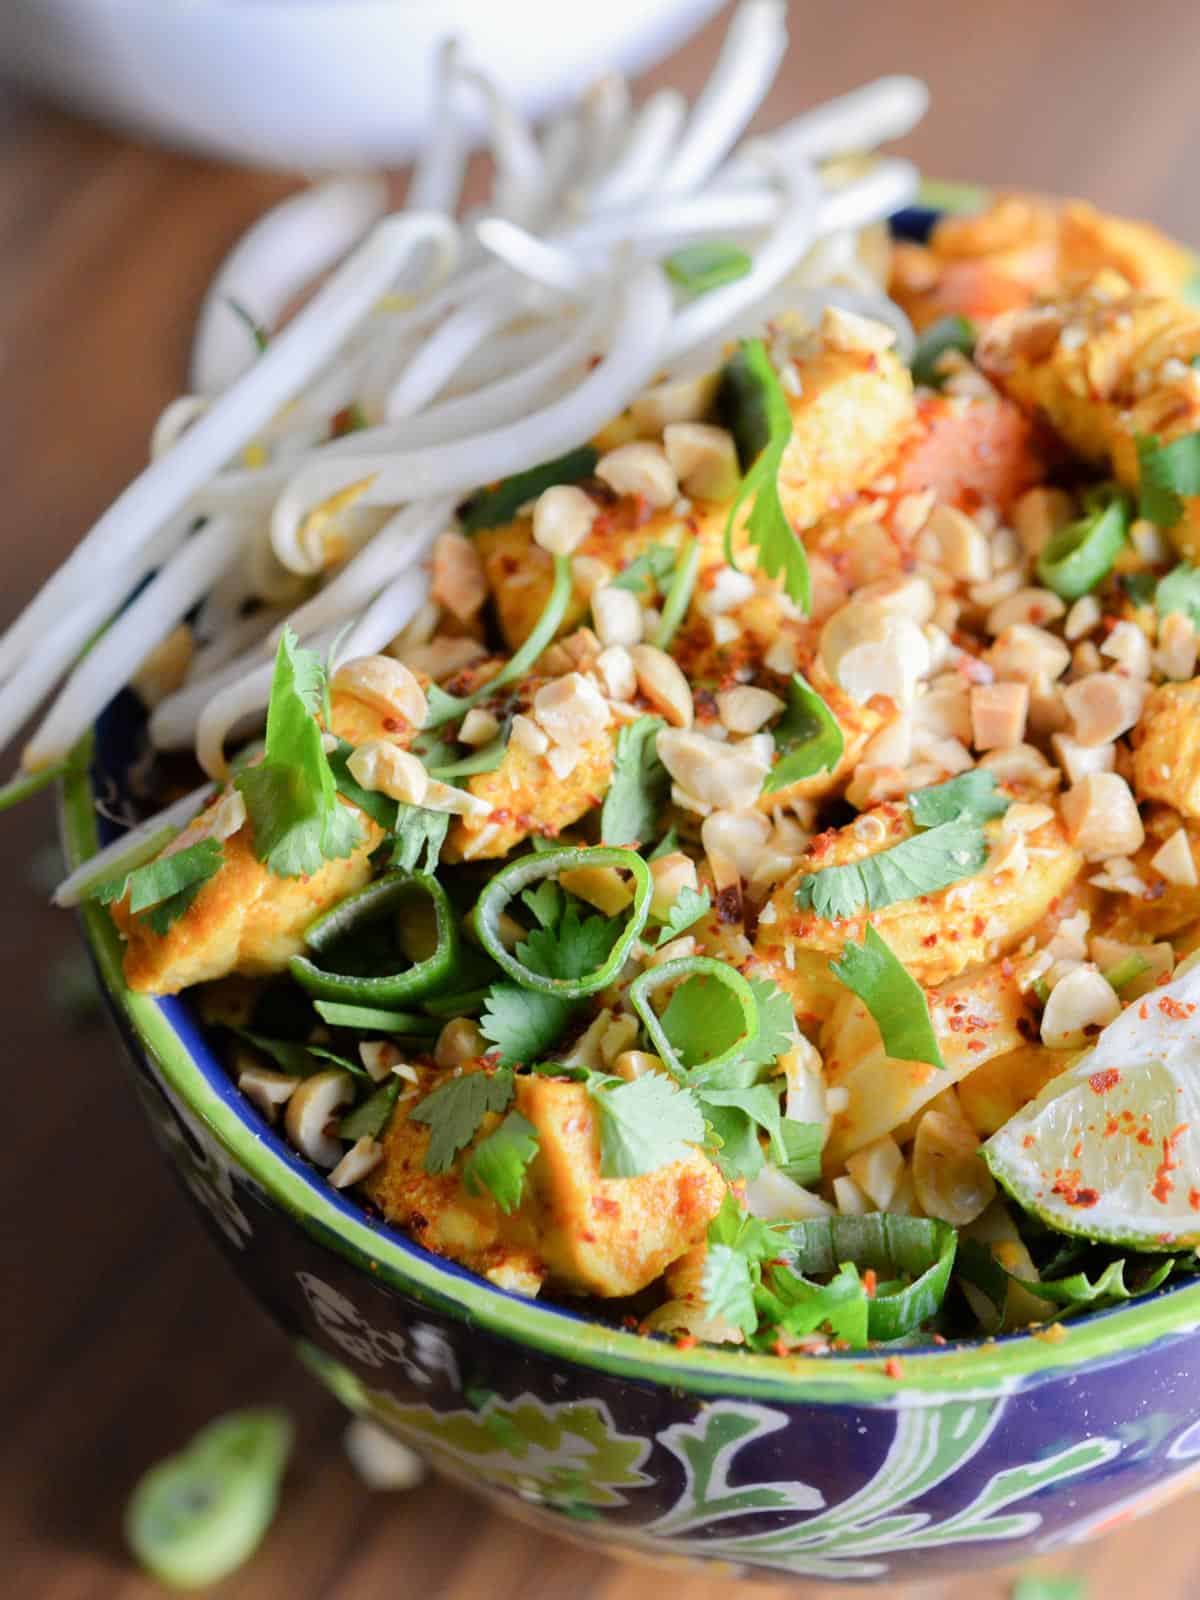 noodle bowls topped with peanuts